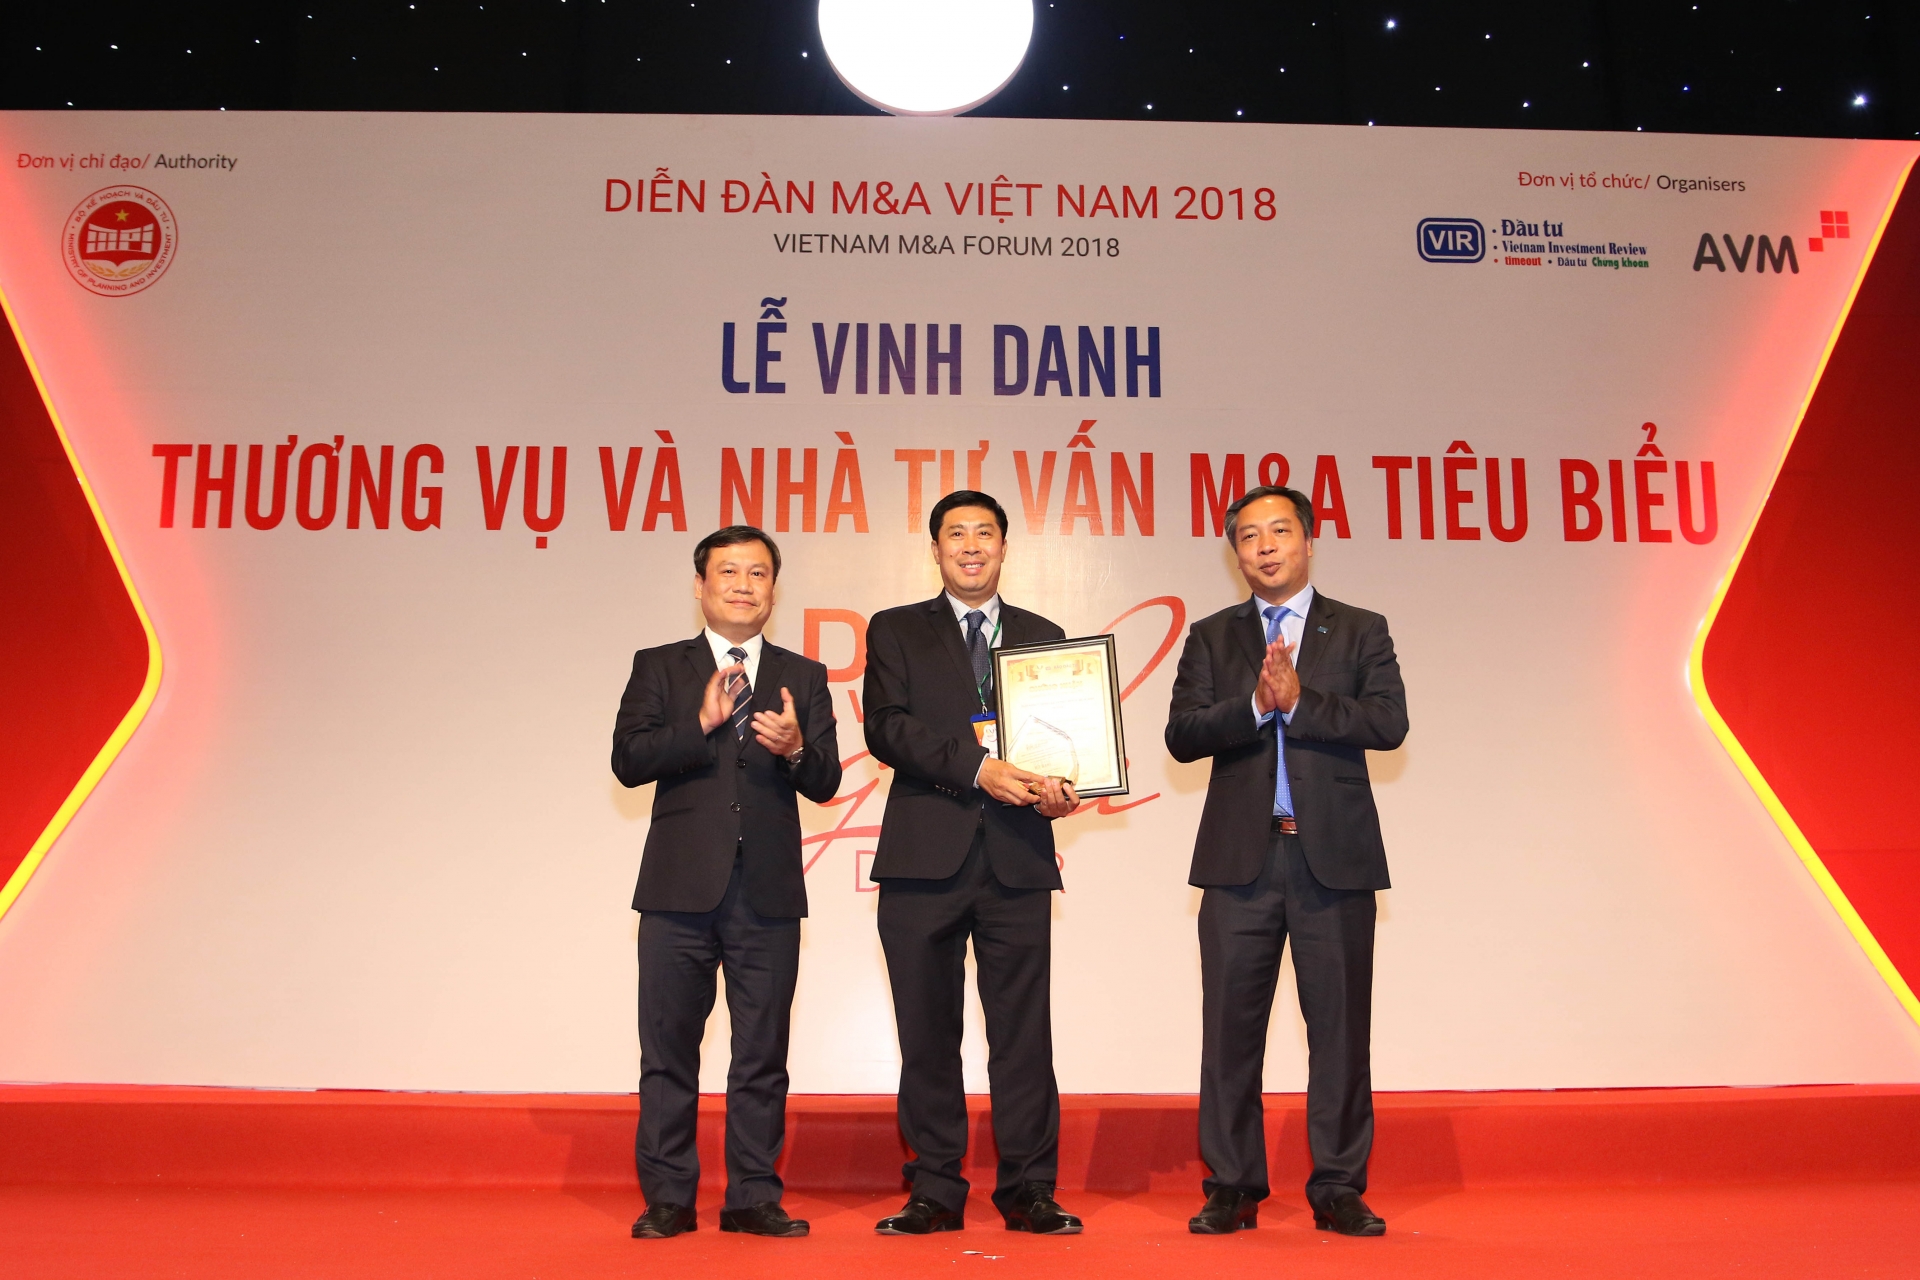 vietnam ma forum 2018 award winners for 2017 2018 and the decade